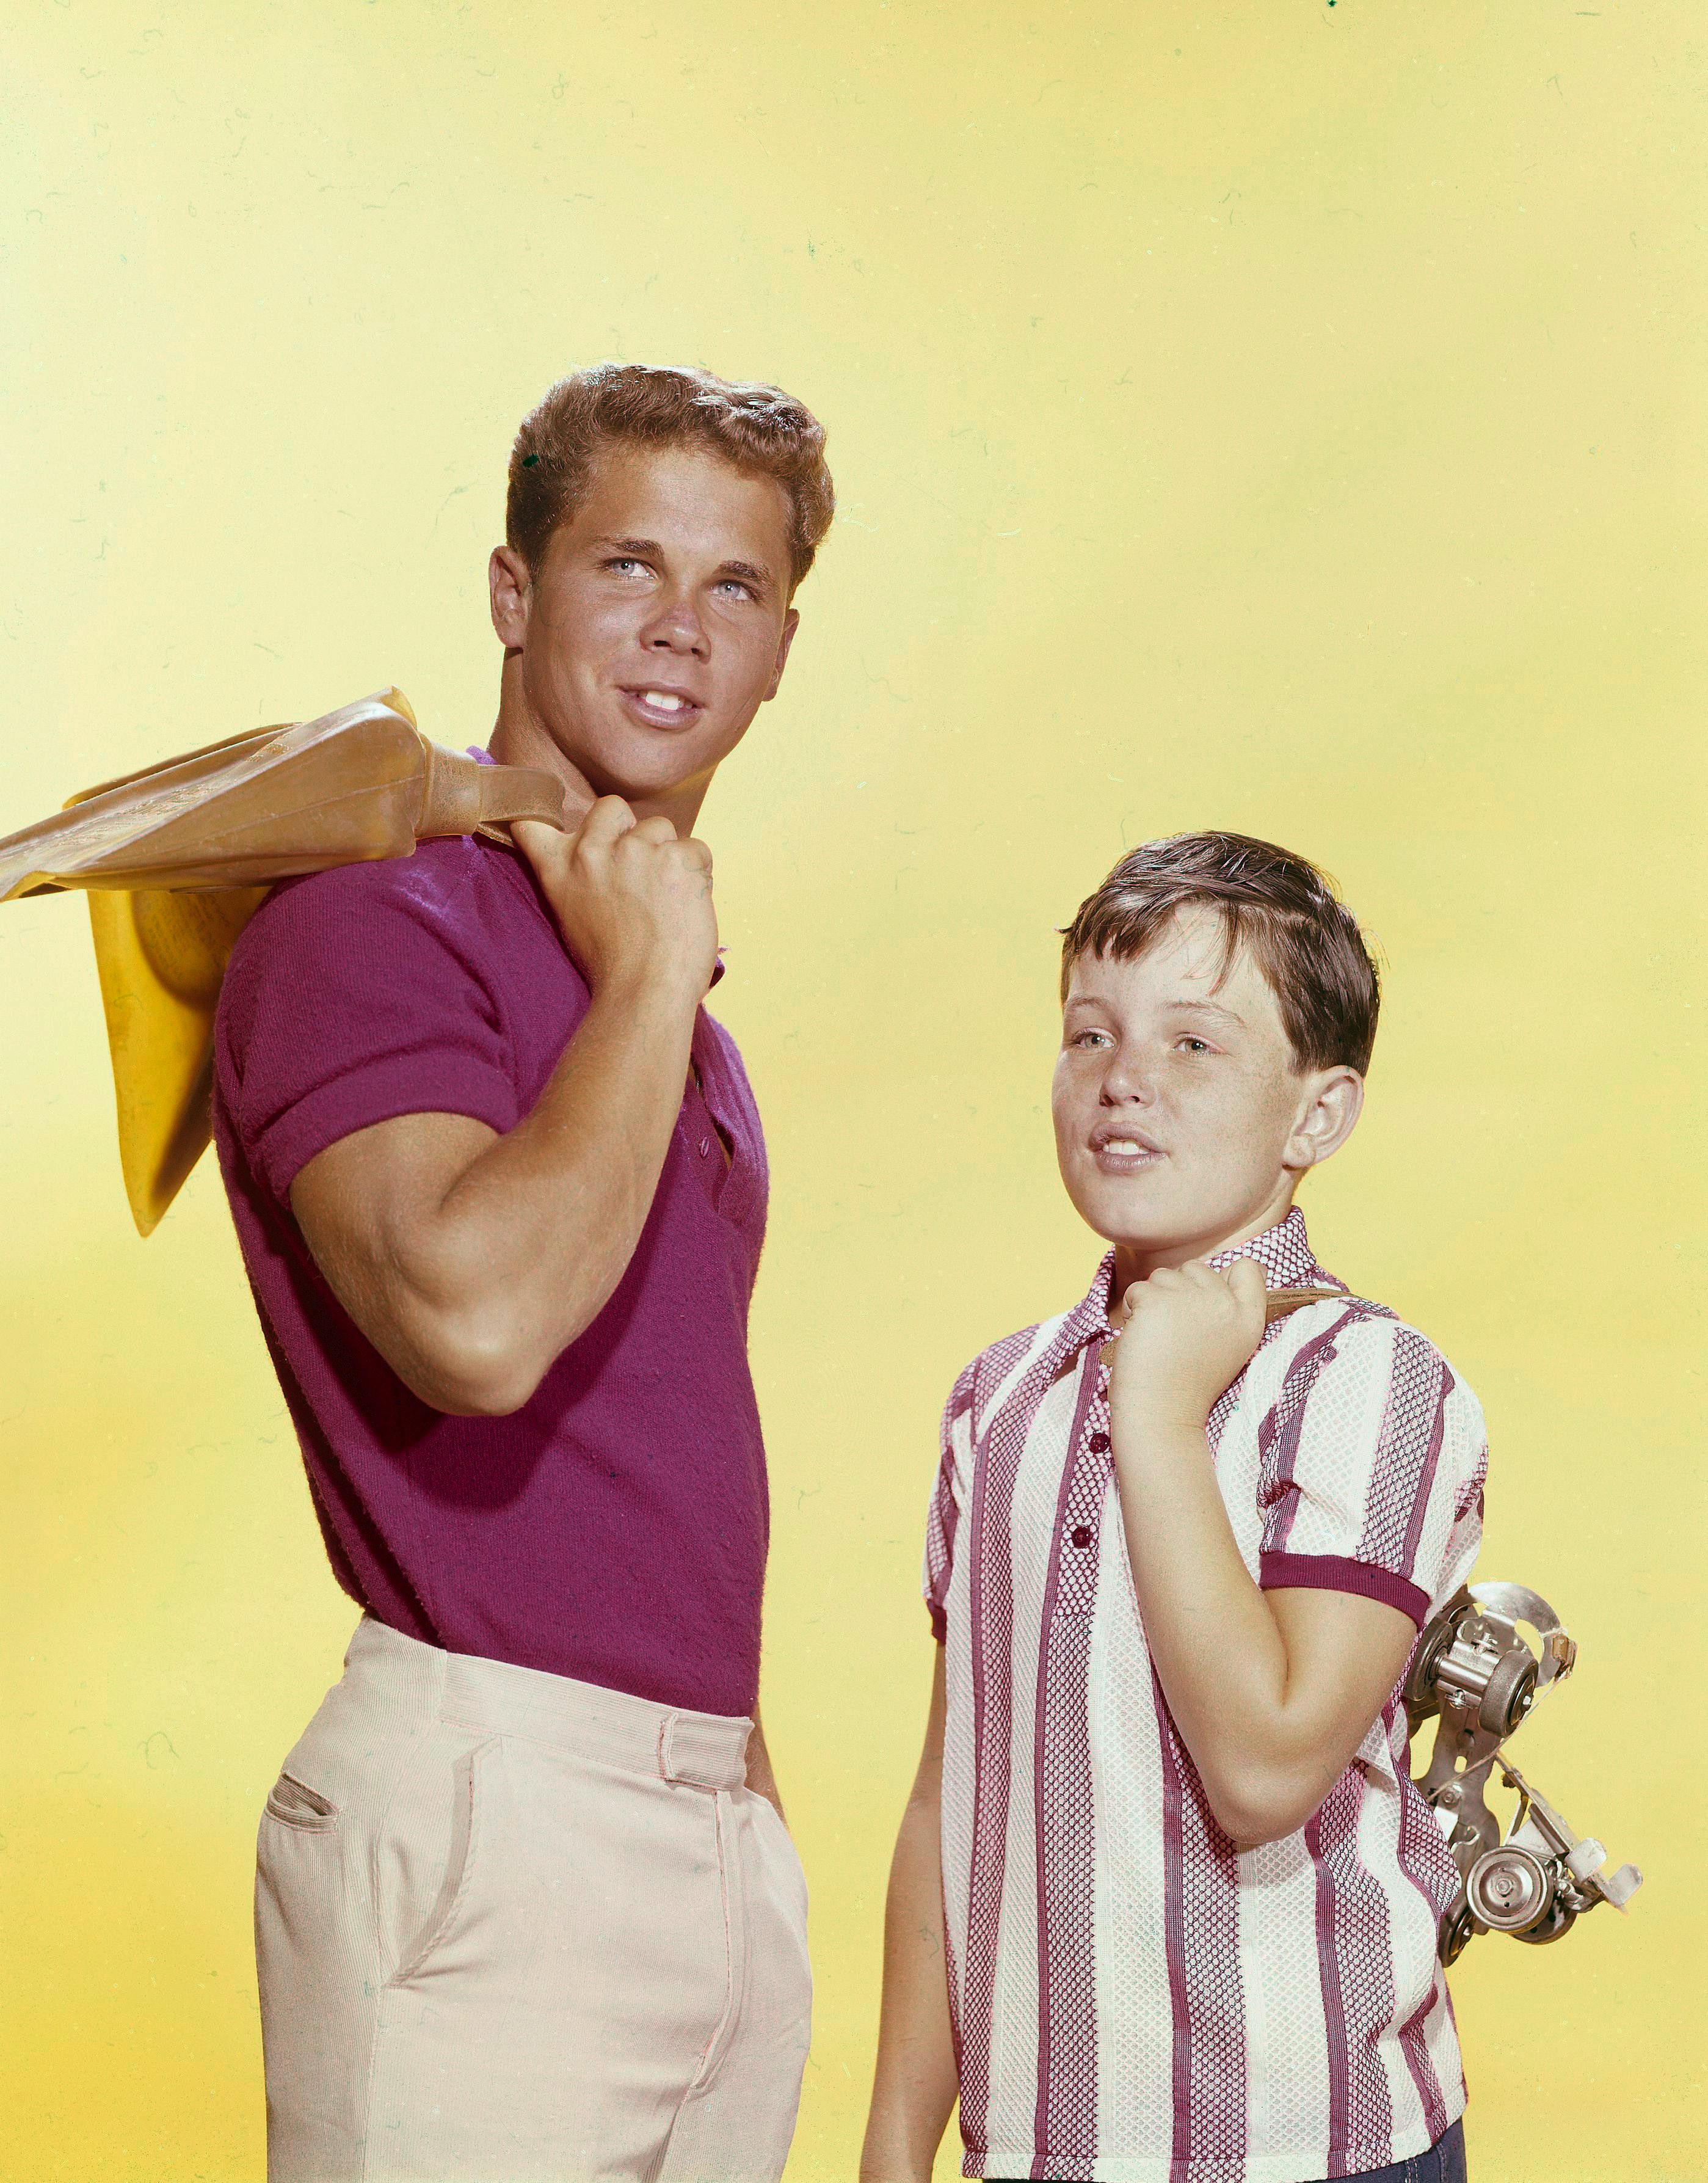 Tony Dow and Jerry Mathers posing in an undated "Leave It to Beaver" photo | Source: Getty Images